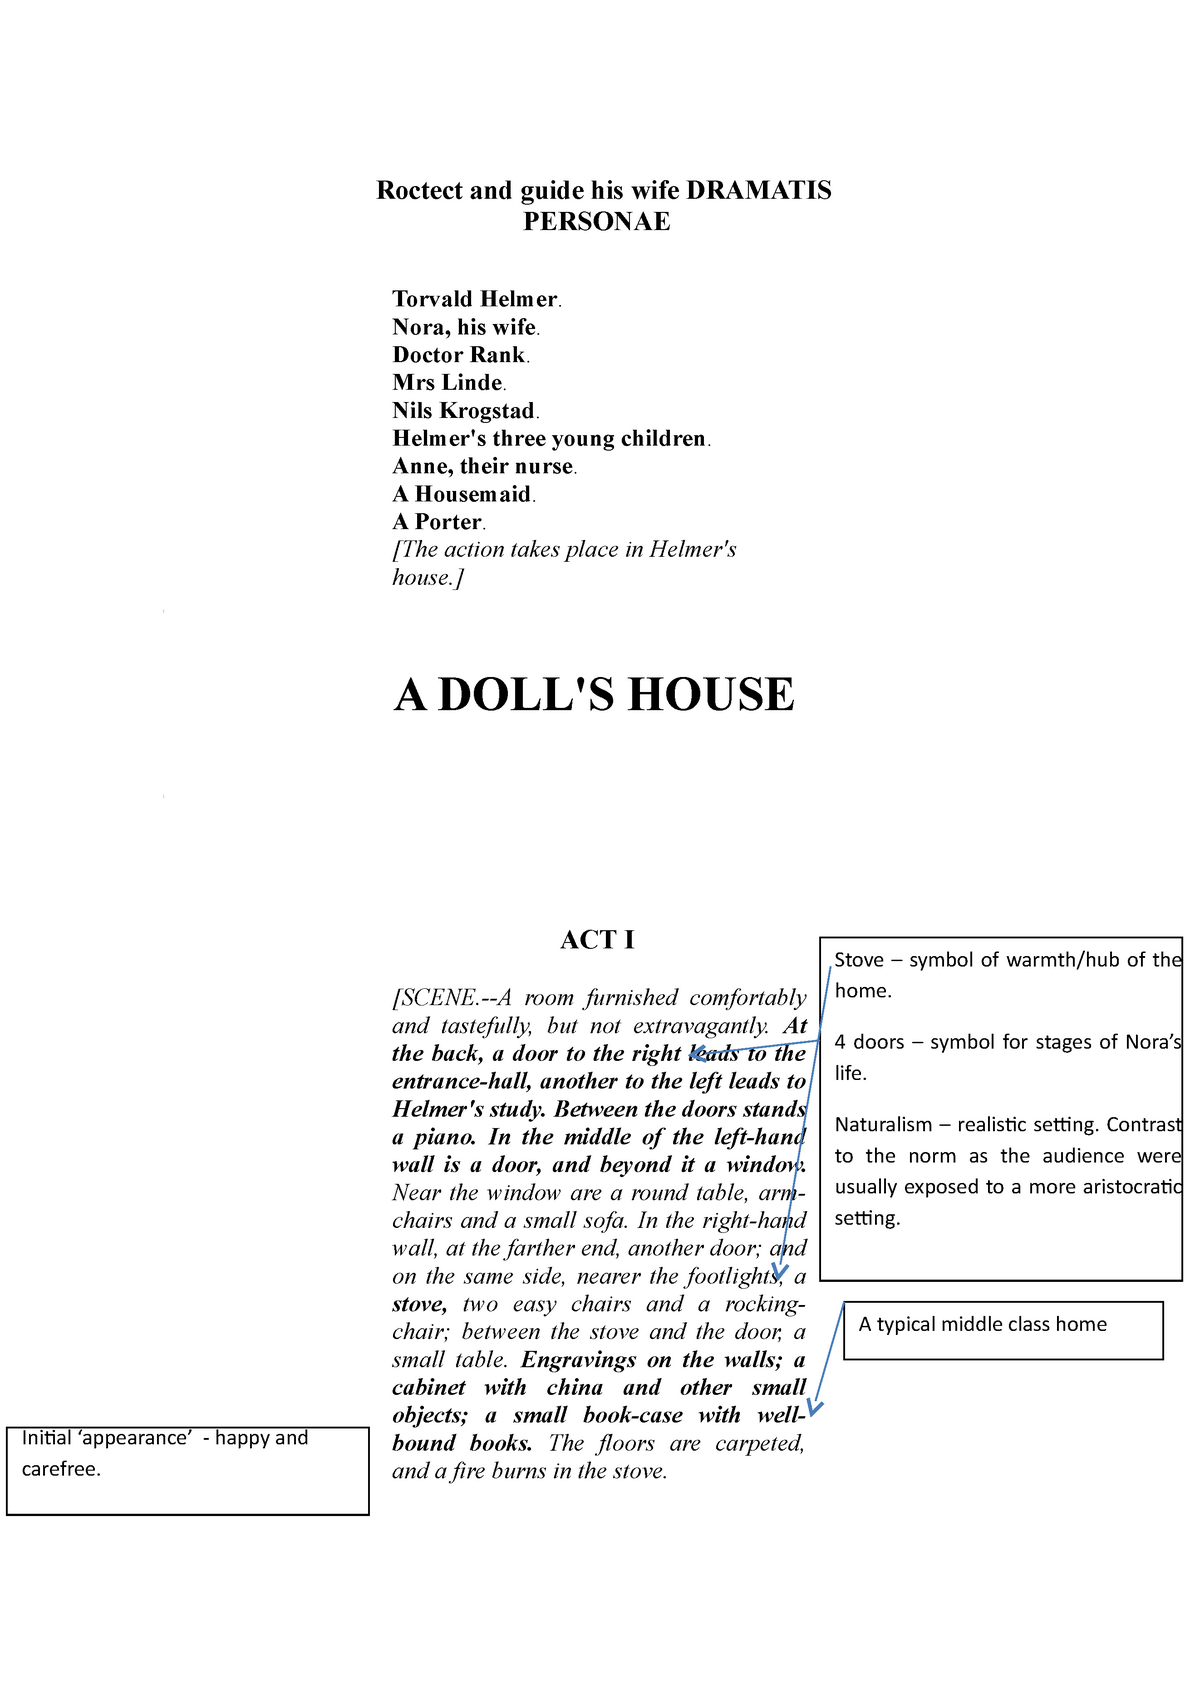 A Doll's House – JR's Journal